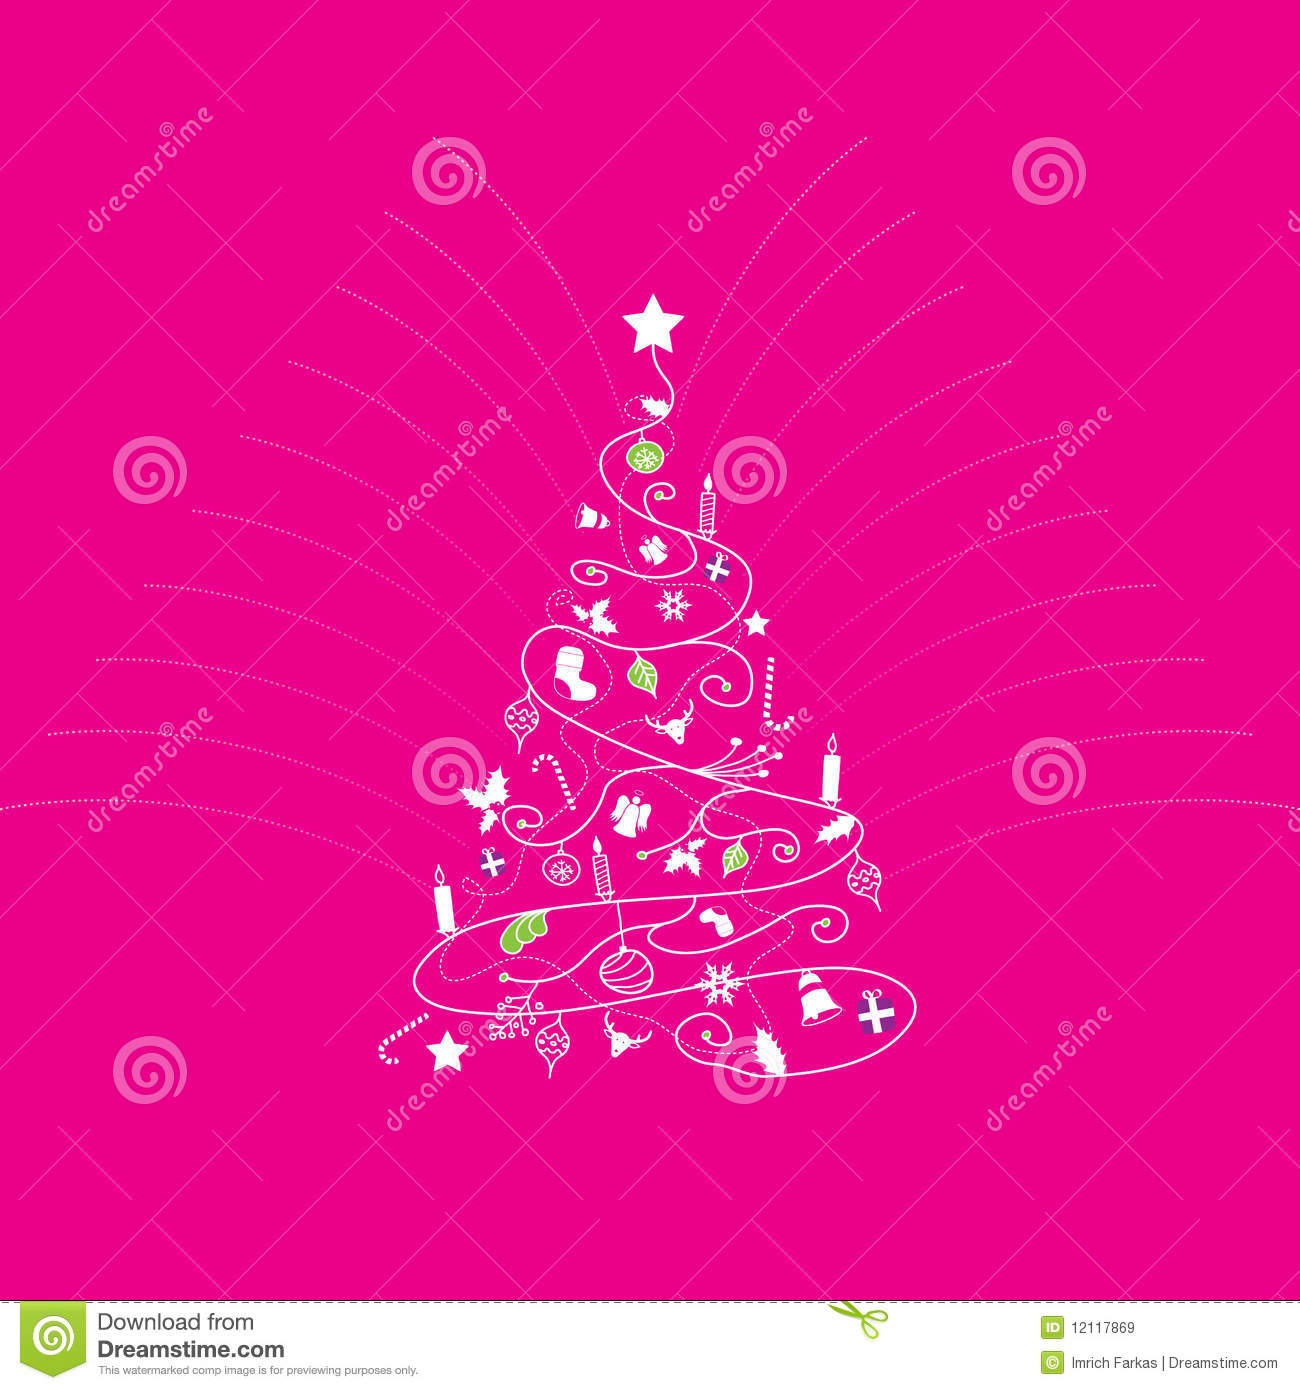 Christmas Tree On Pink Background  Royalty Free Stock Images   Image